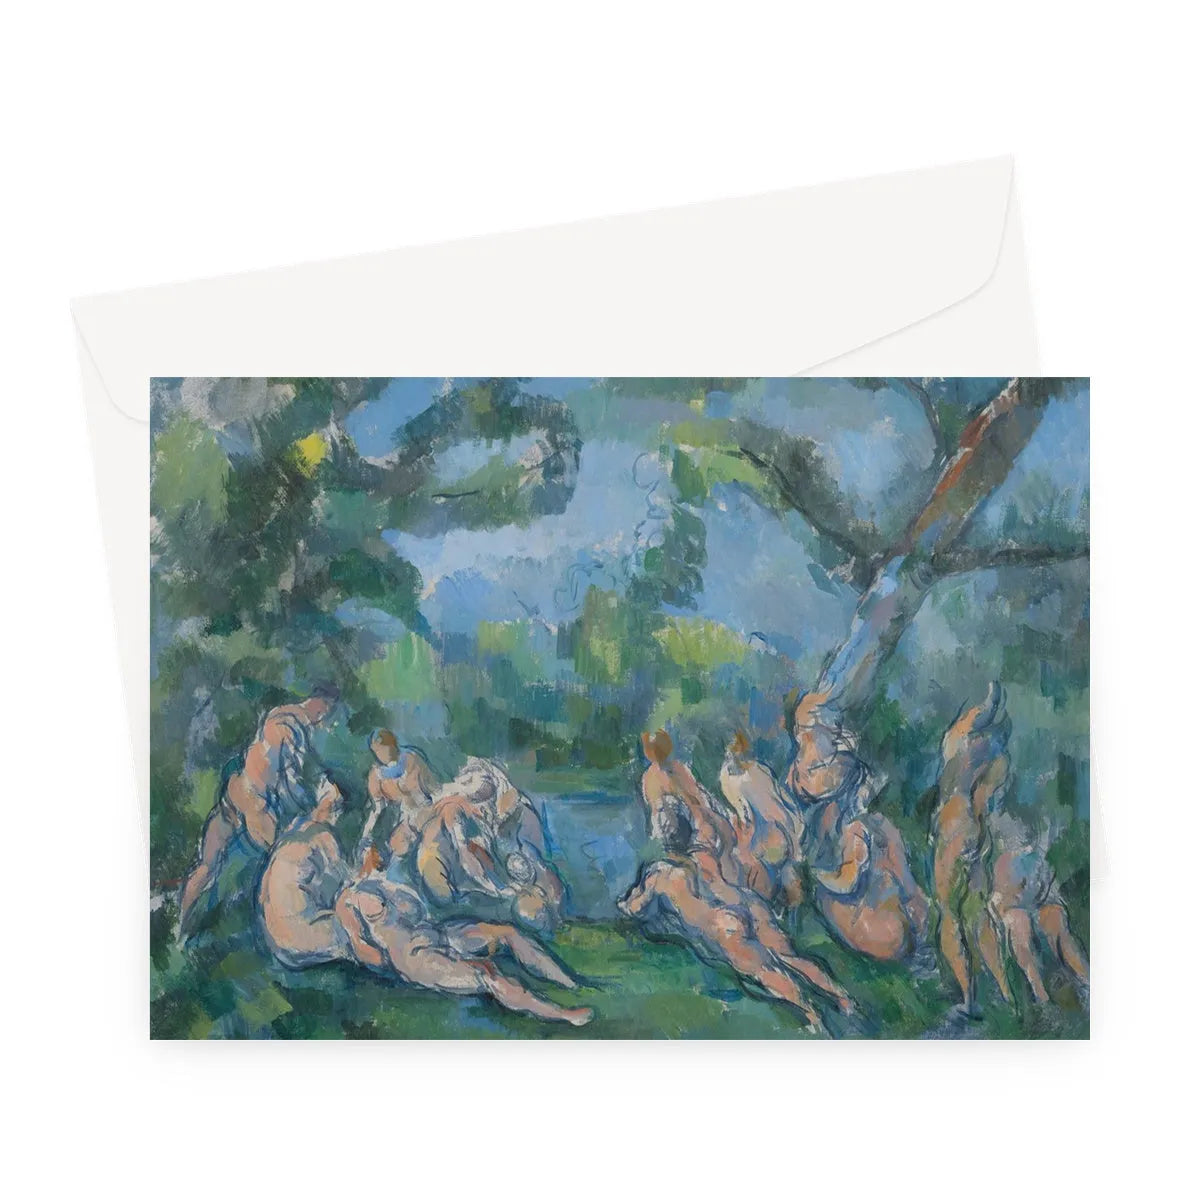 The Bathers By Paul Cezanne Greeting Card - A5 Landscape / 1 Card - Notebooks & Notepads - Aesthetic Art